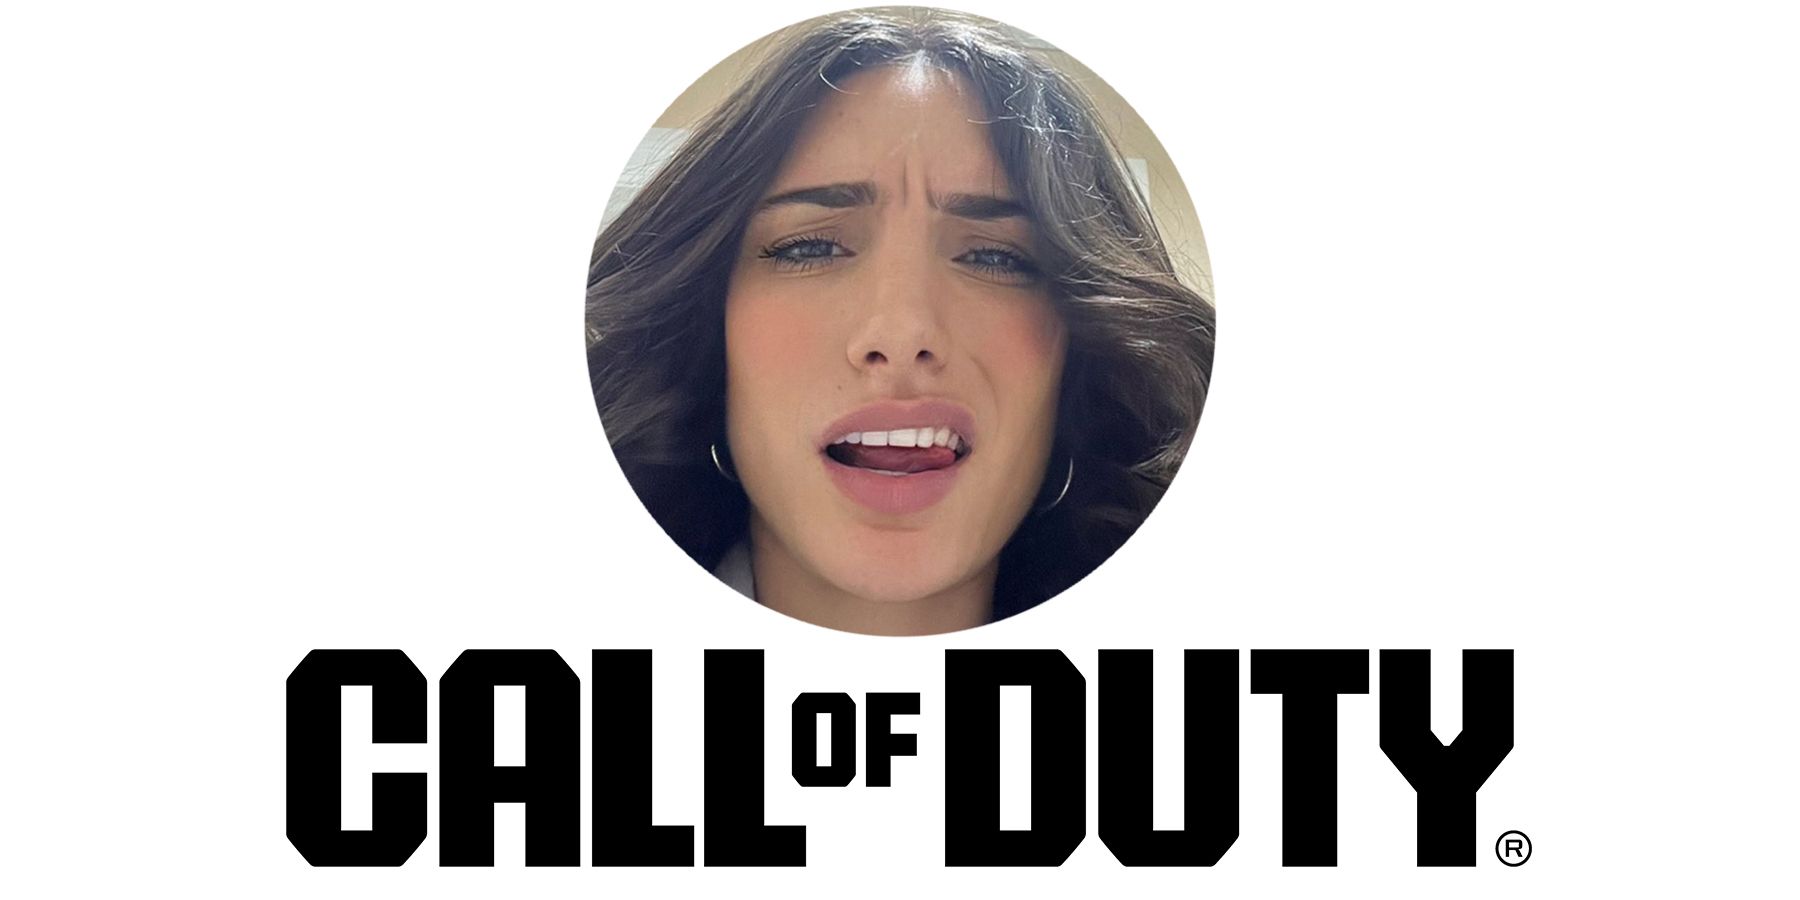 Nadia Amine looking displeased annoyed above Call of Duty series logo white background